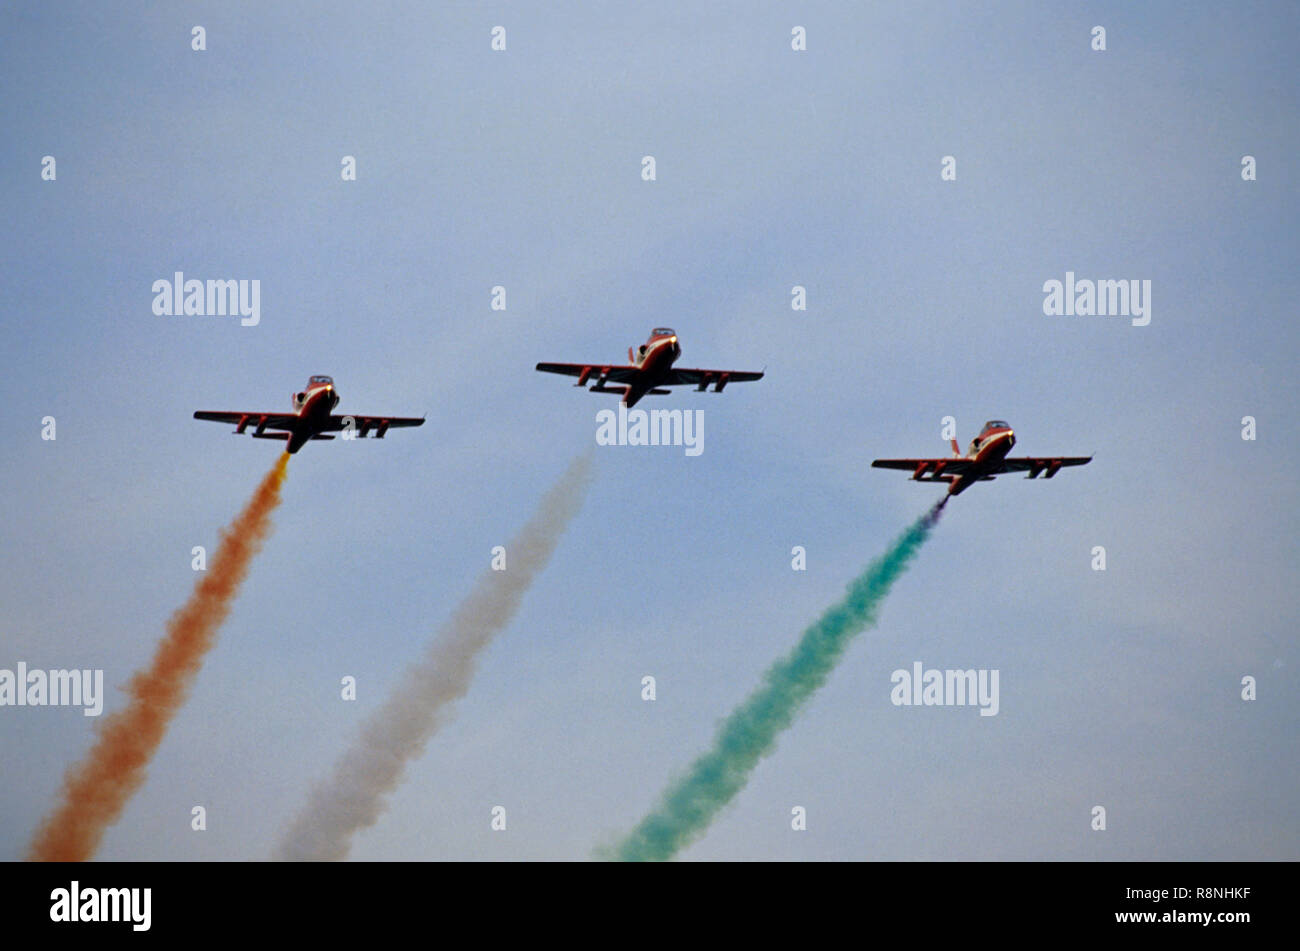 Indian Air Force aircraft flying three planes formation air show smoke flag of India Indian flag Stock Photo